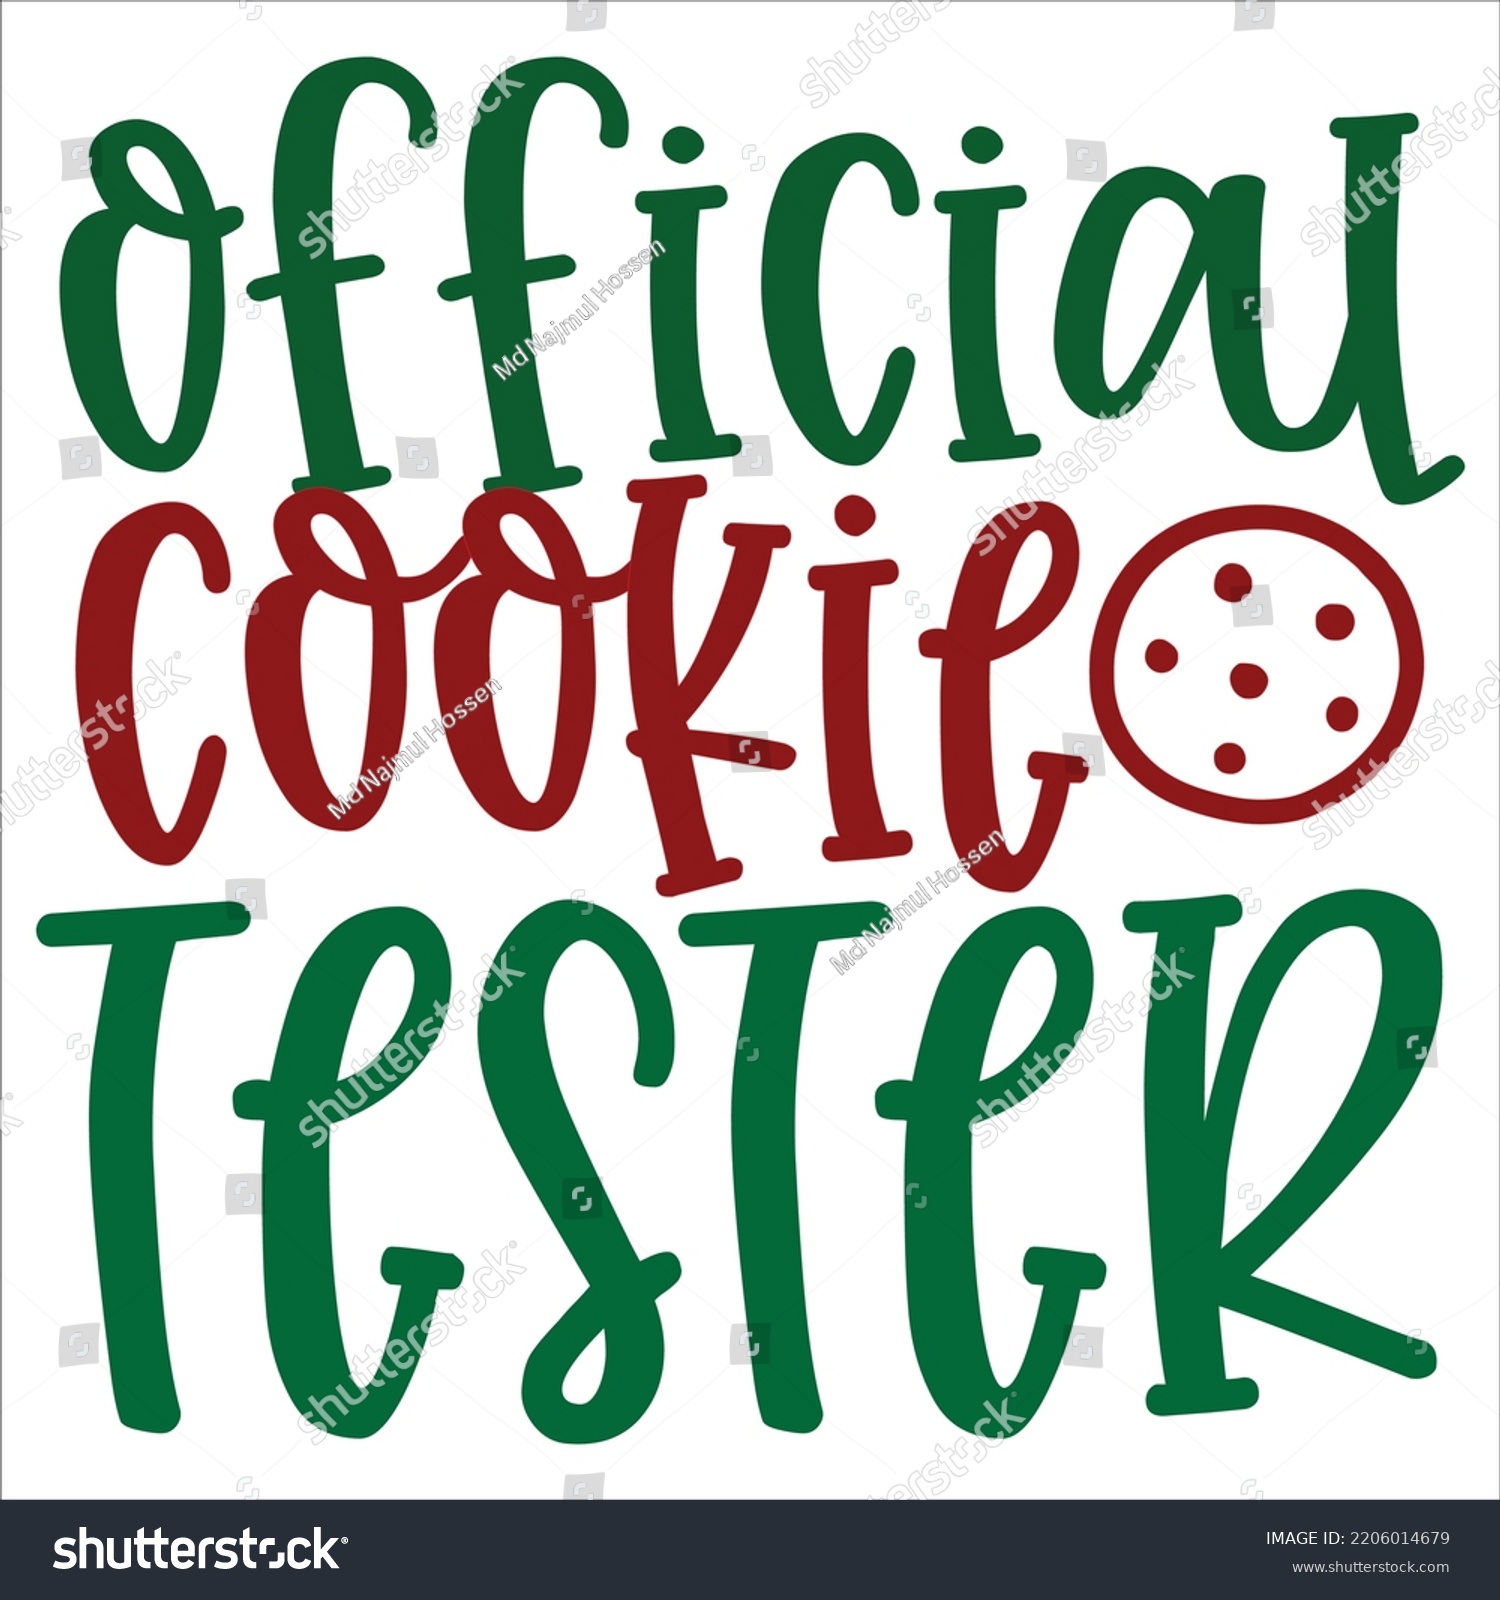 SVG of Official Cookie Tester, Merry Christmas shirts, mugs, signs lettering with antler vector illustration for Christmas hand lettered, svg, Christmas svg, Christmas Clipart Silhouette cutting svg